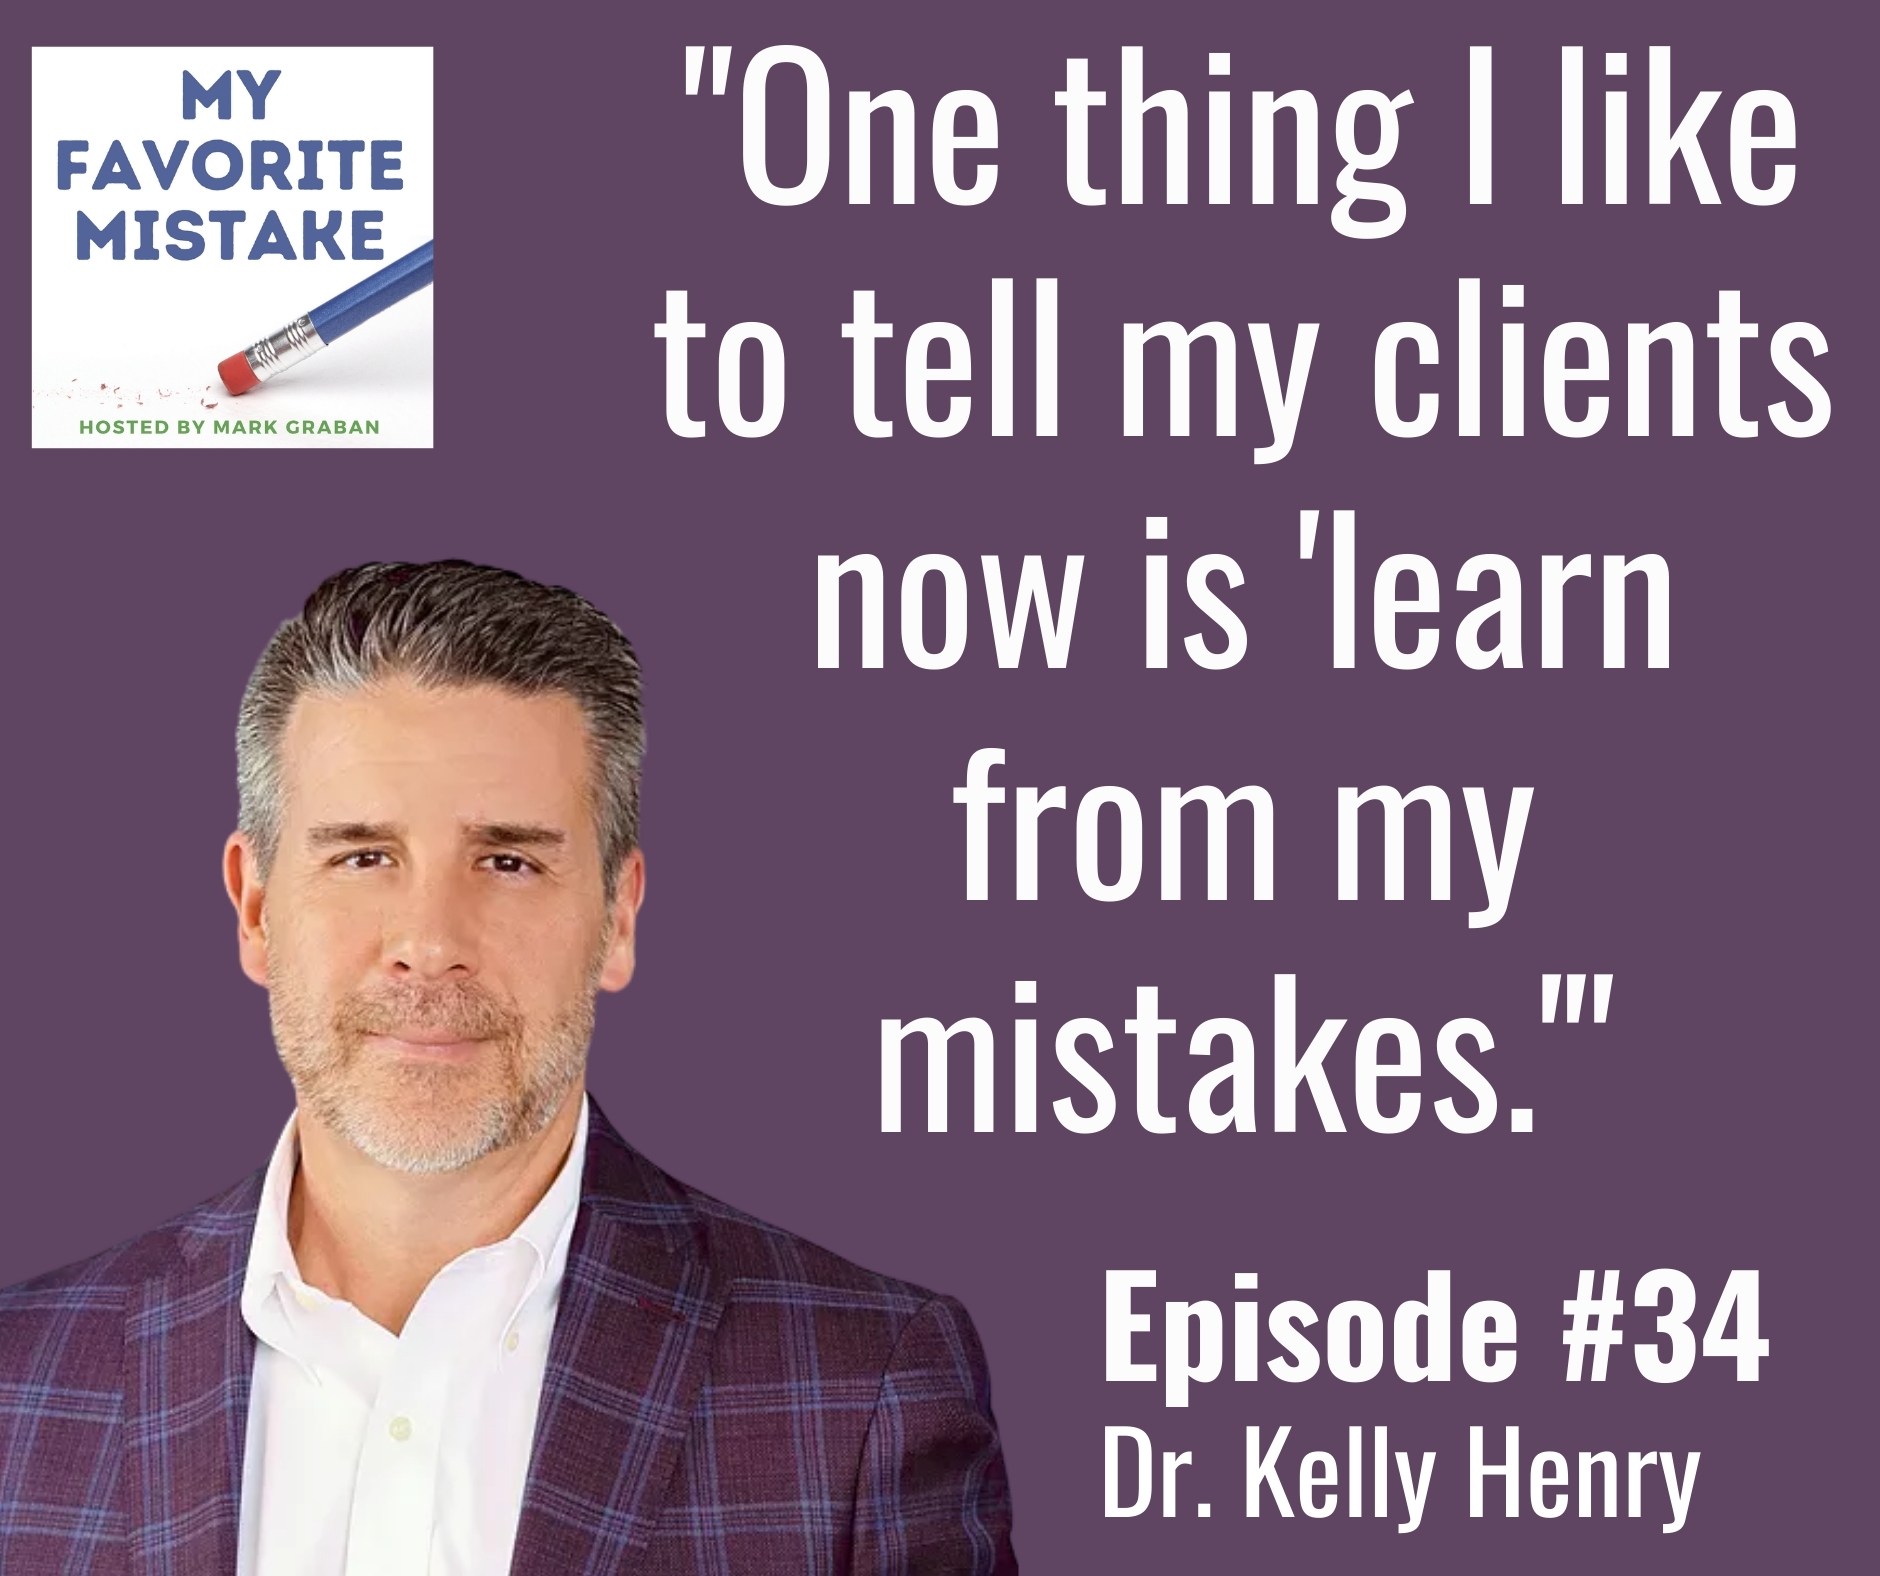 "One thing I like to tell my clients now is 'learn from my mistakes.'"